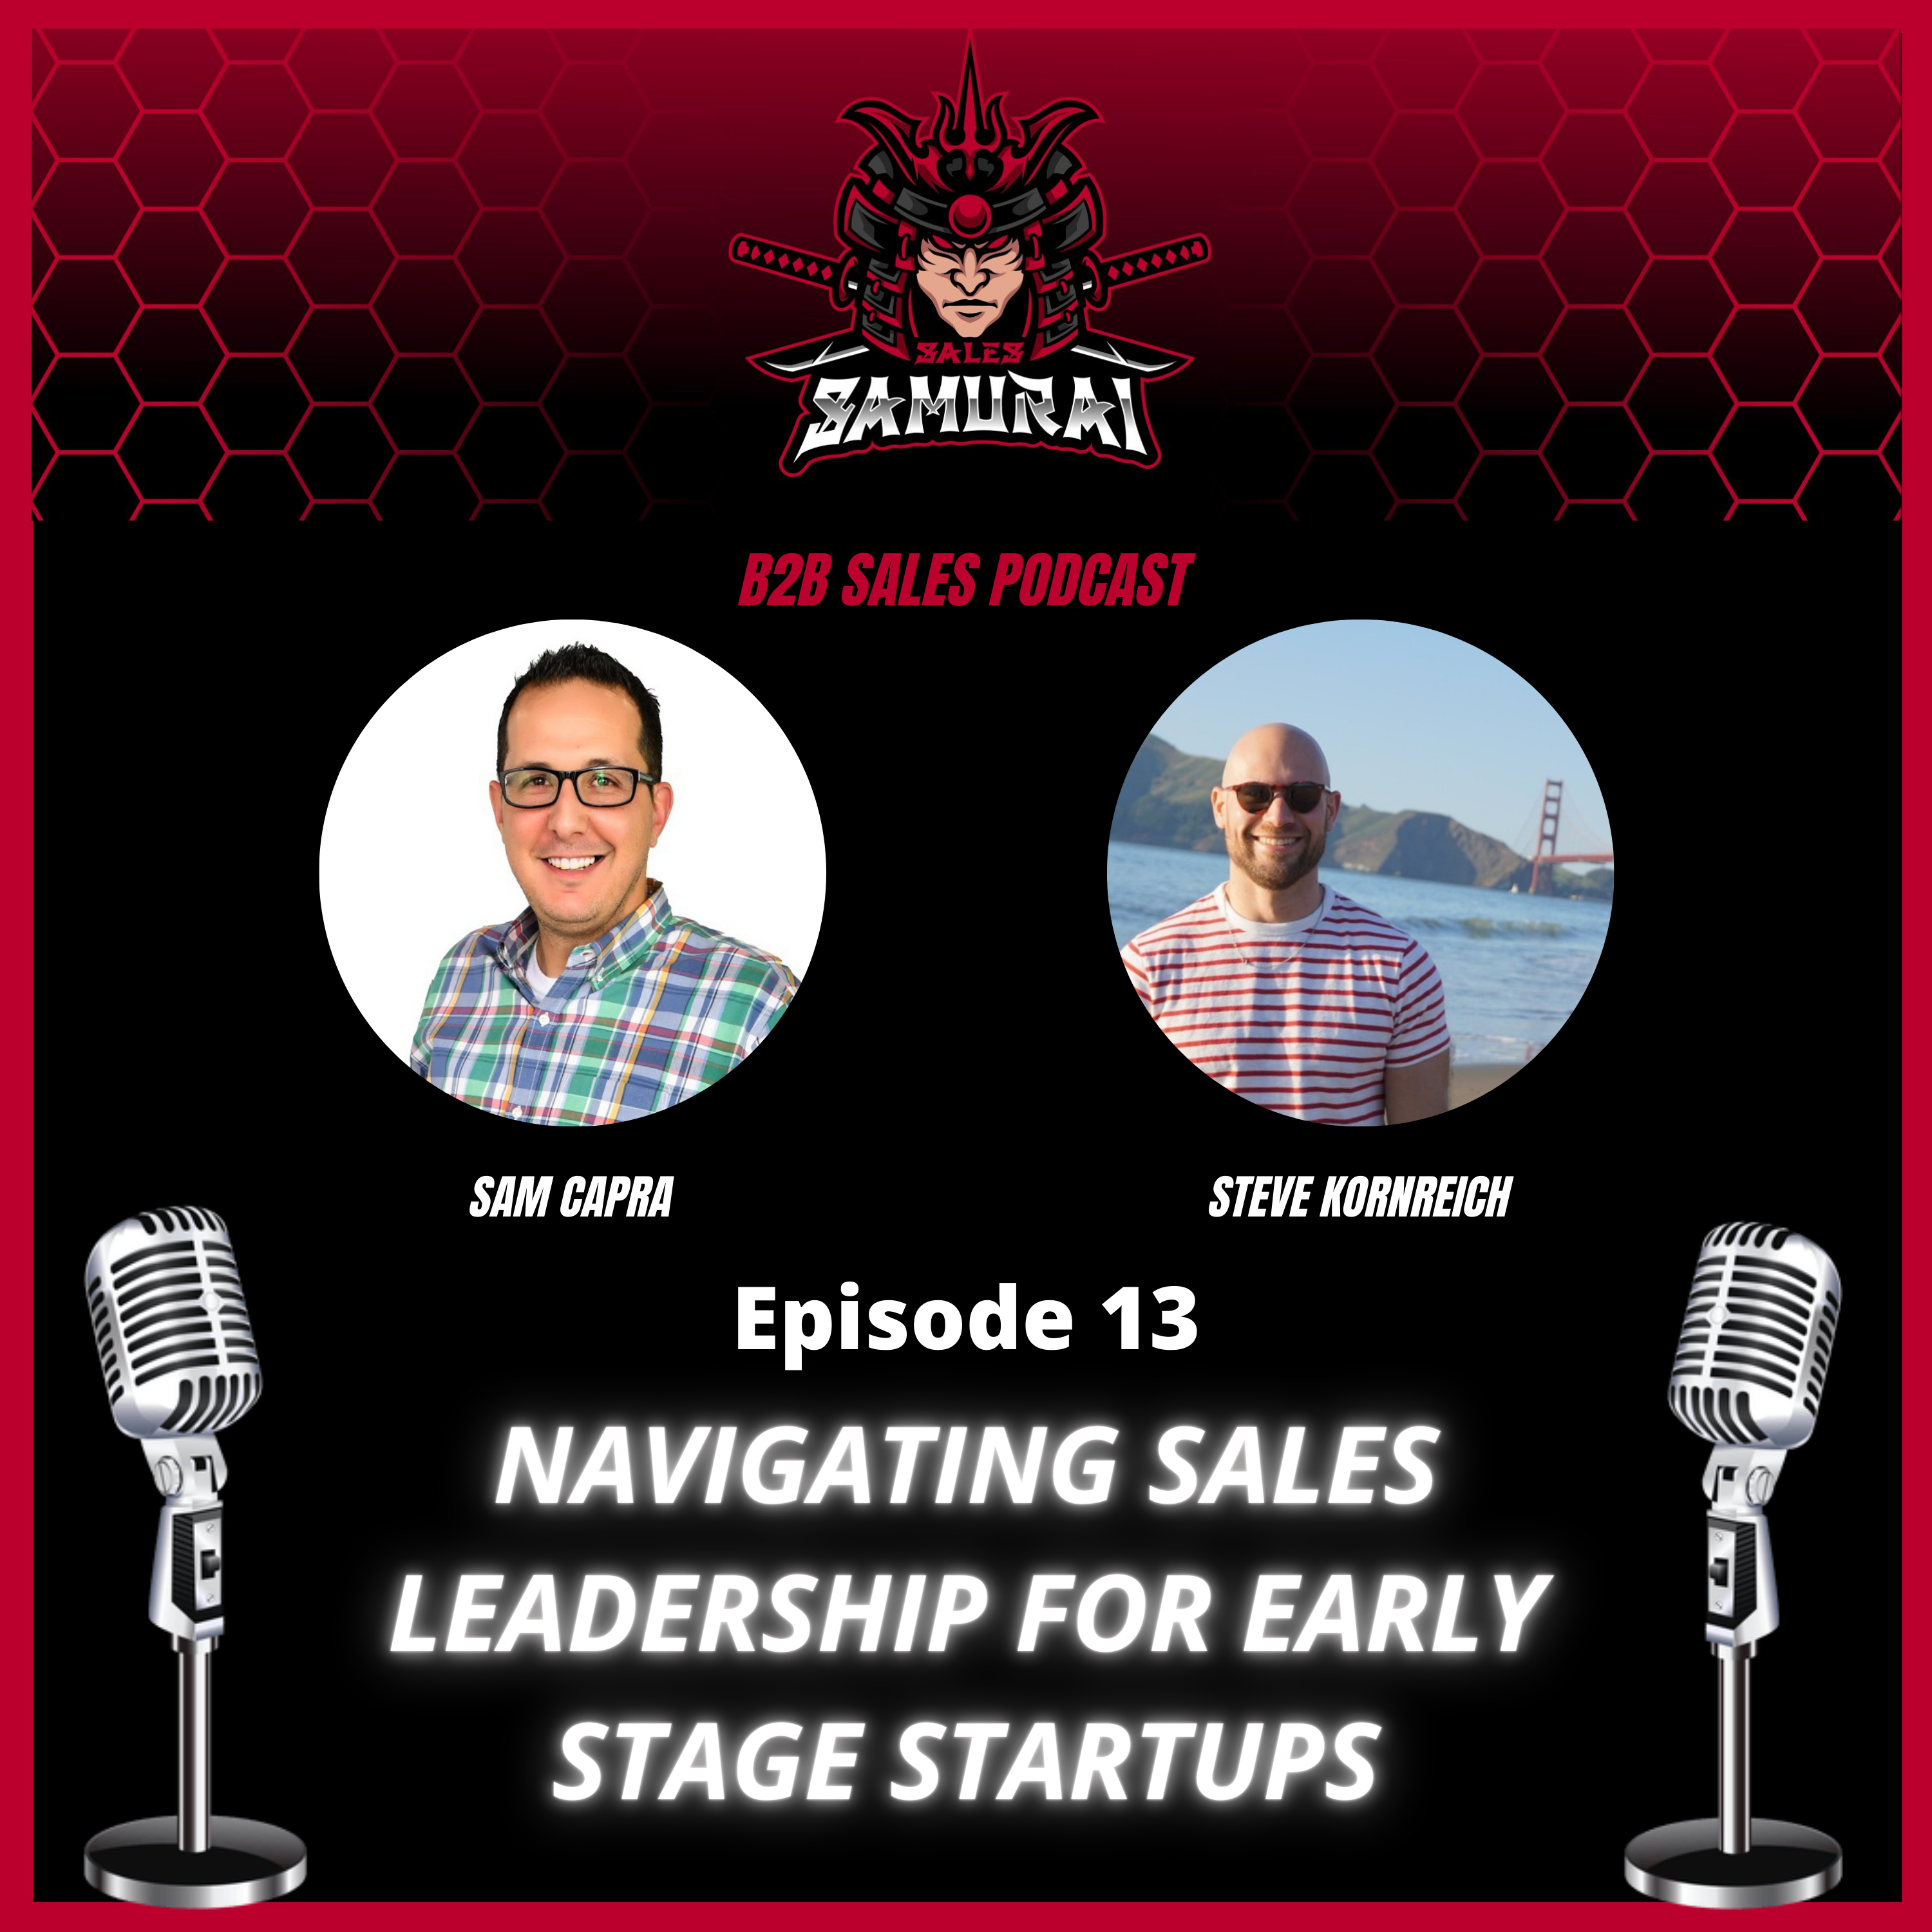 Navigating Sales Leadership for Early Stage Startups